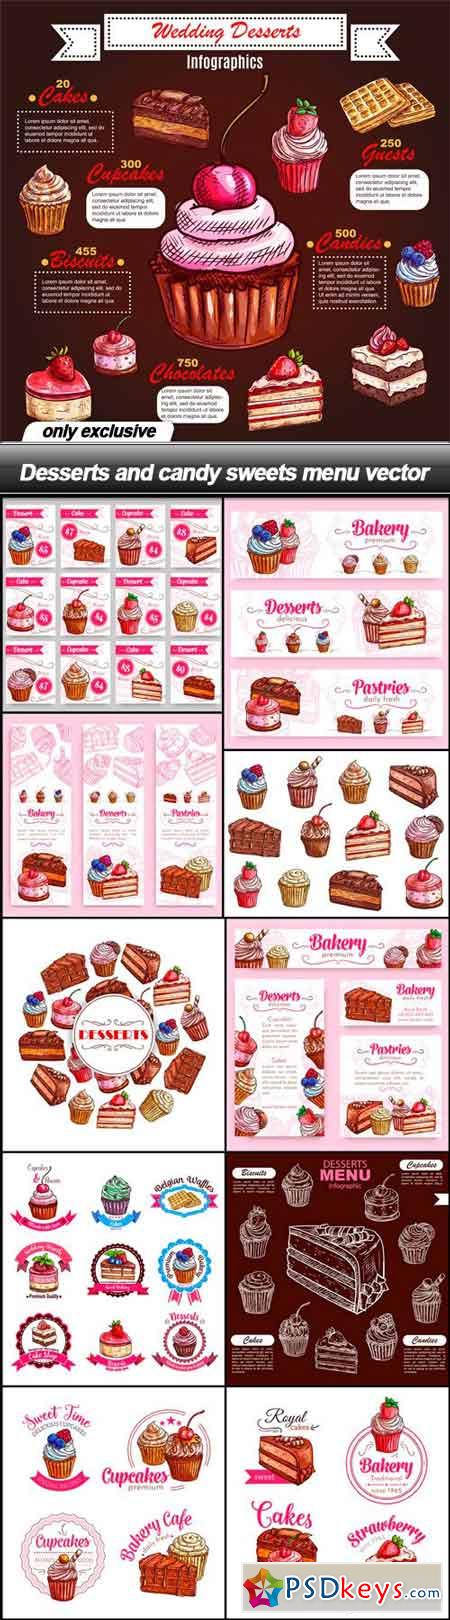 Desserts and candy sweets menu vector - 11 EPS